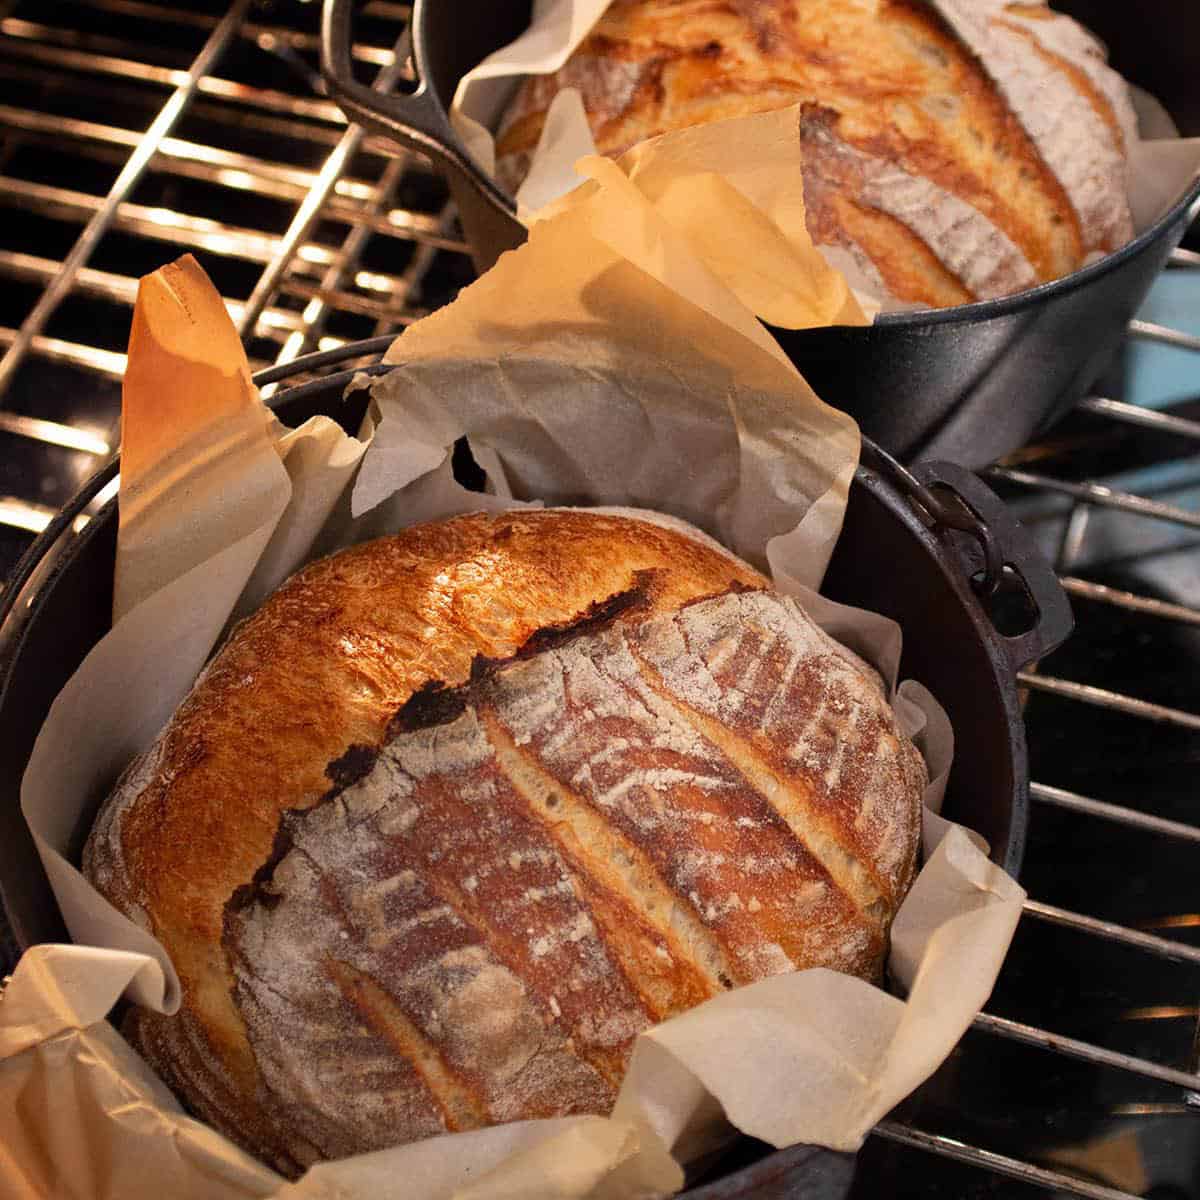 Two loaves of bread in cast iron dutch ovens being baked in the oven.